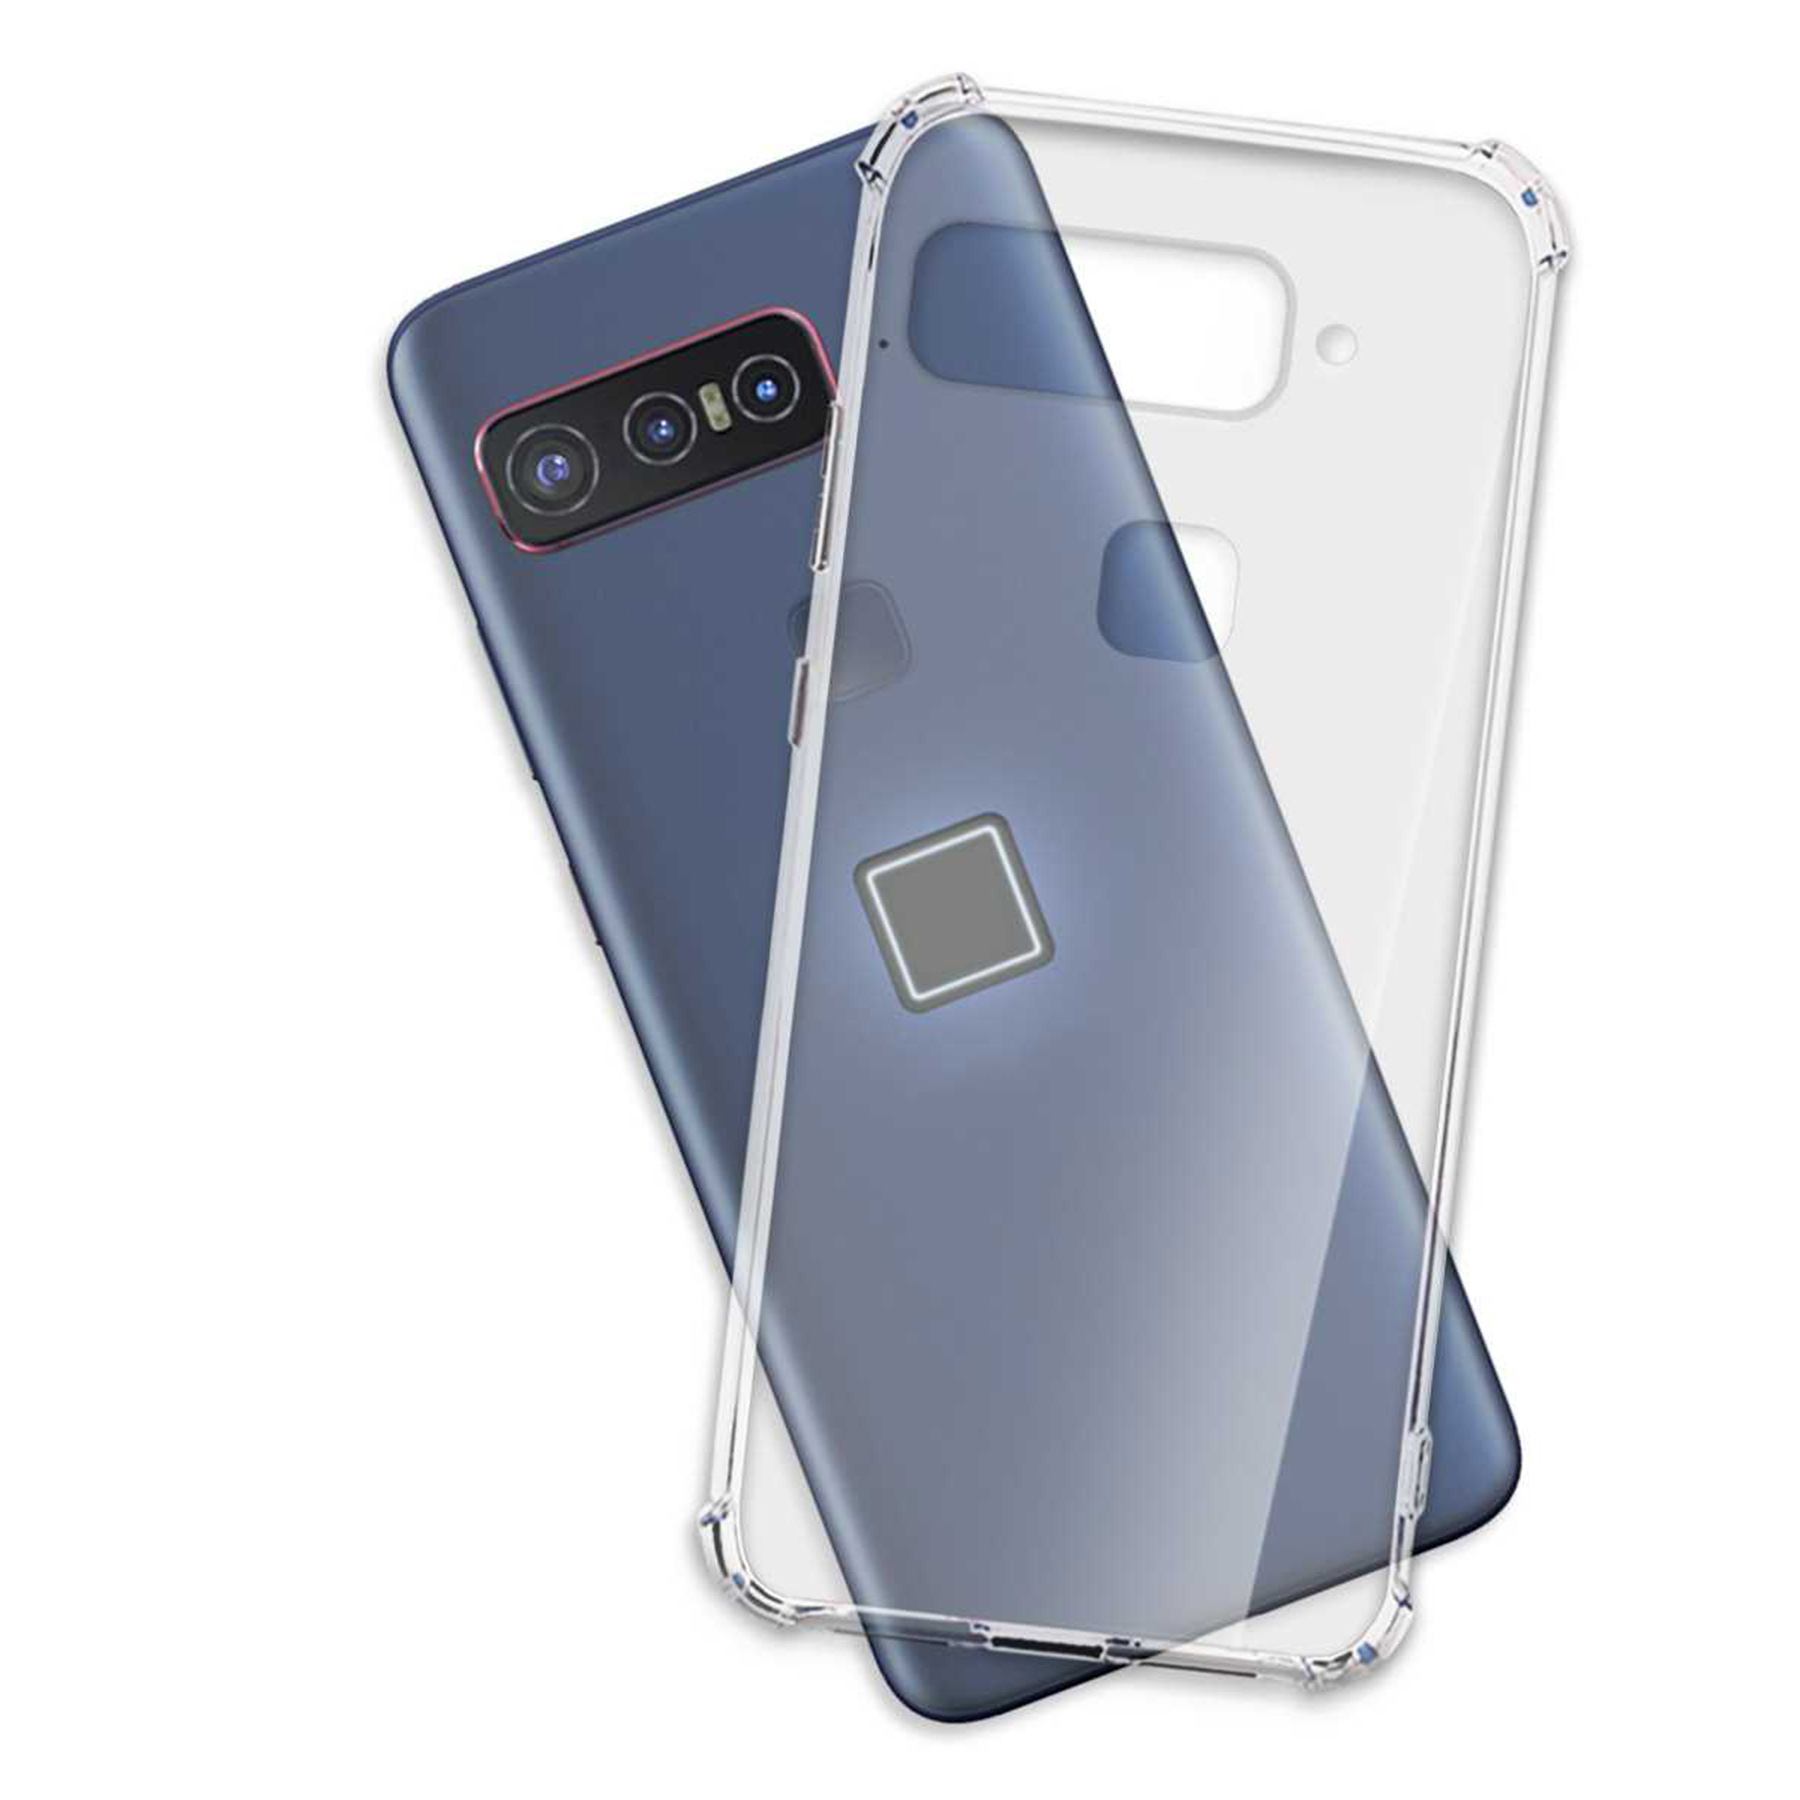 MTB MORE Insiders, Clear for Transparent Snapdragon Backcover, Armor Smartphone Asus, Qualcomm ENERGY Case